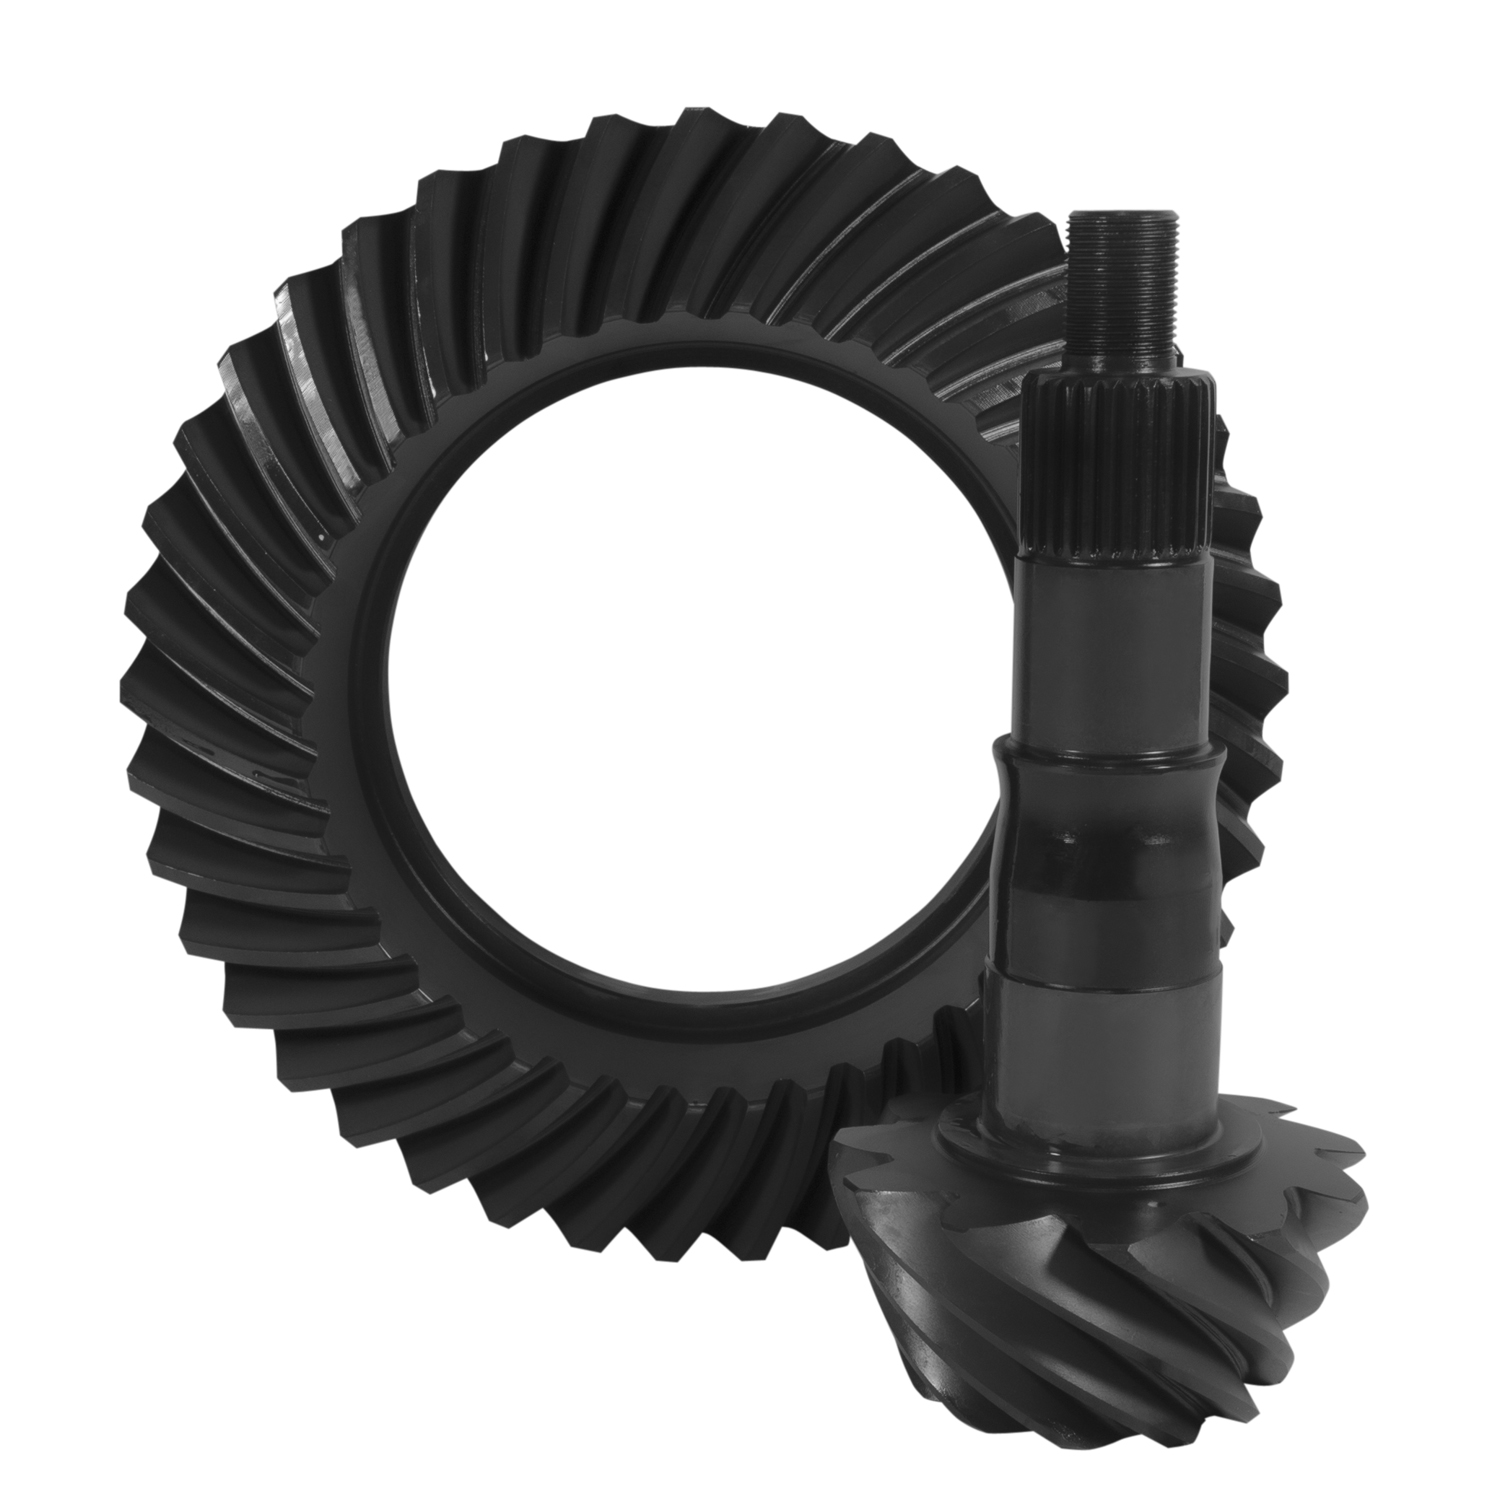 High performance Yukon Ring & Pinion gear set for '15 & up Ford 8.8", 3.73 Ratio